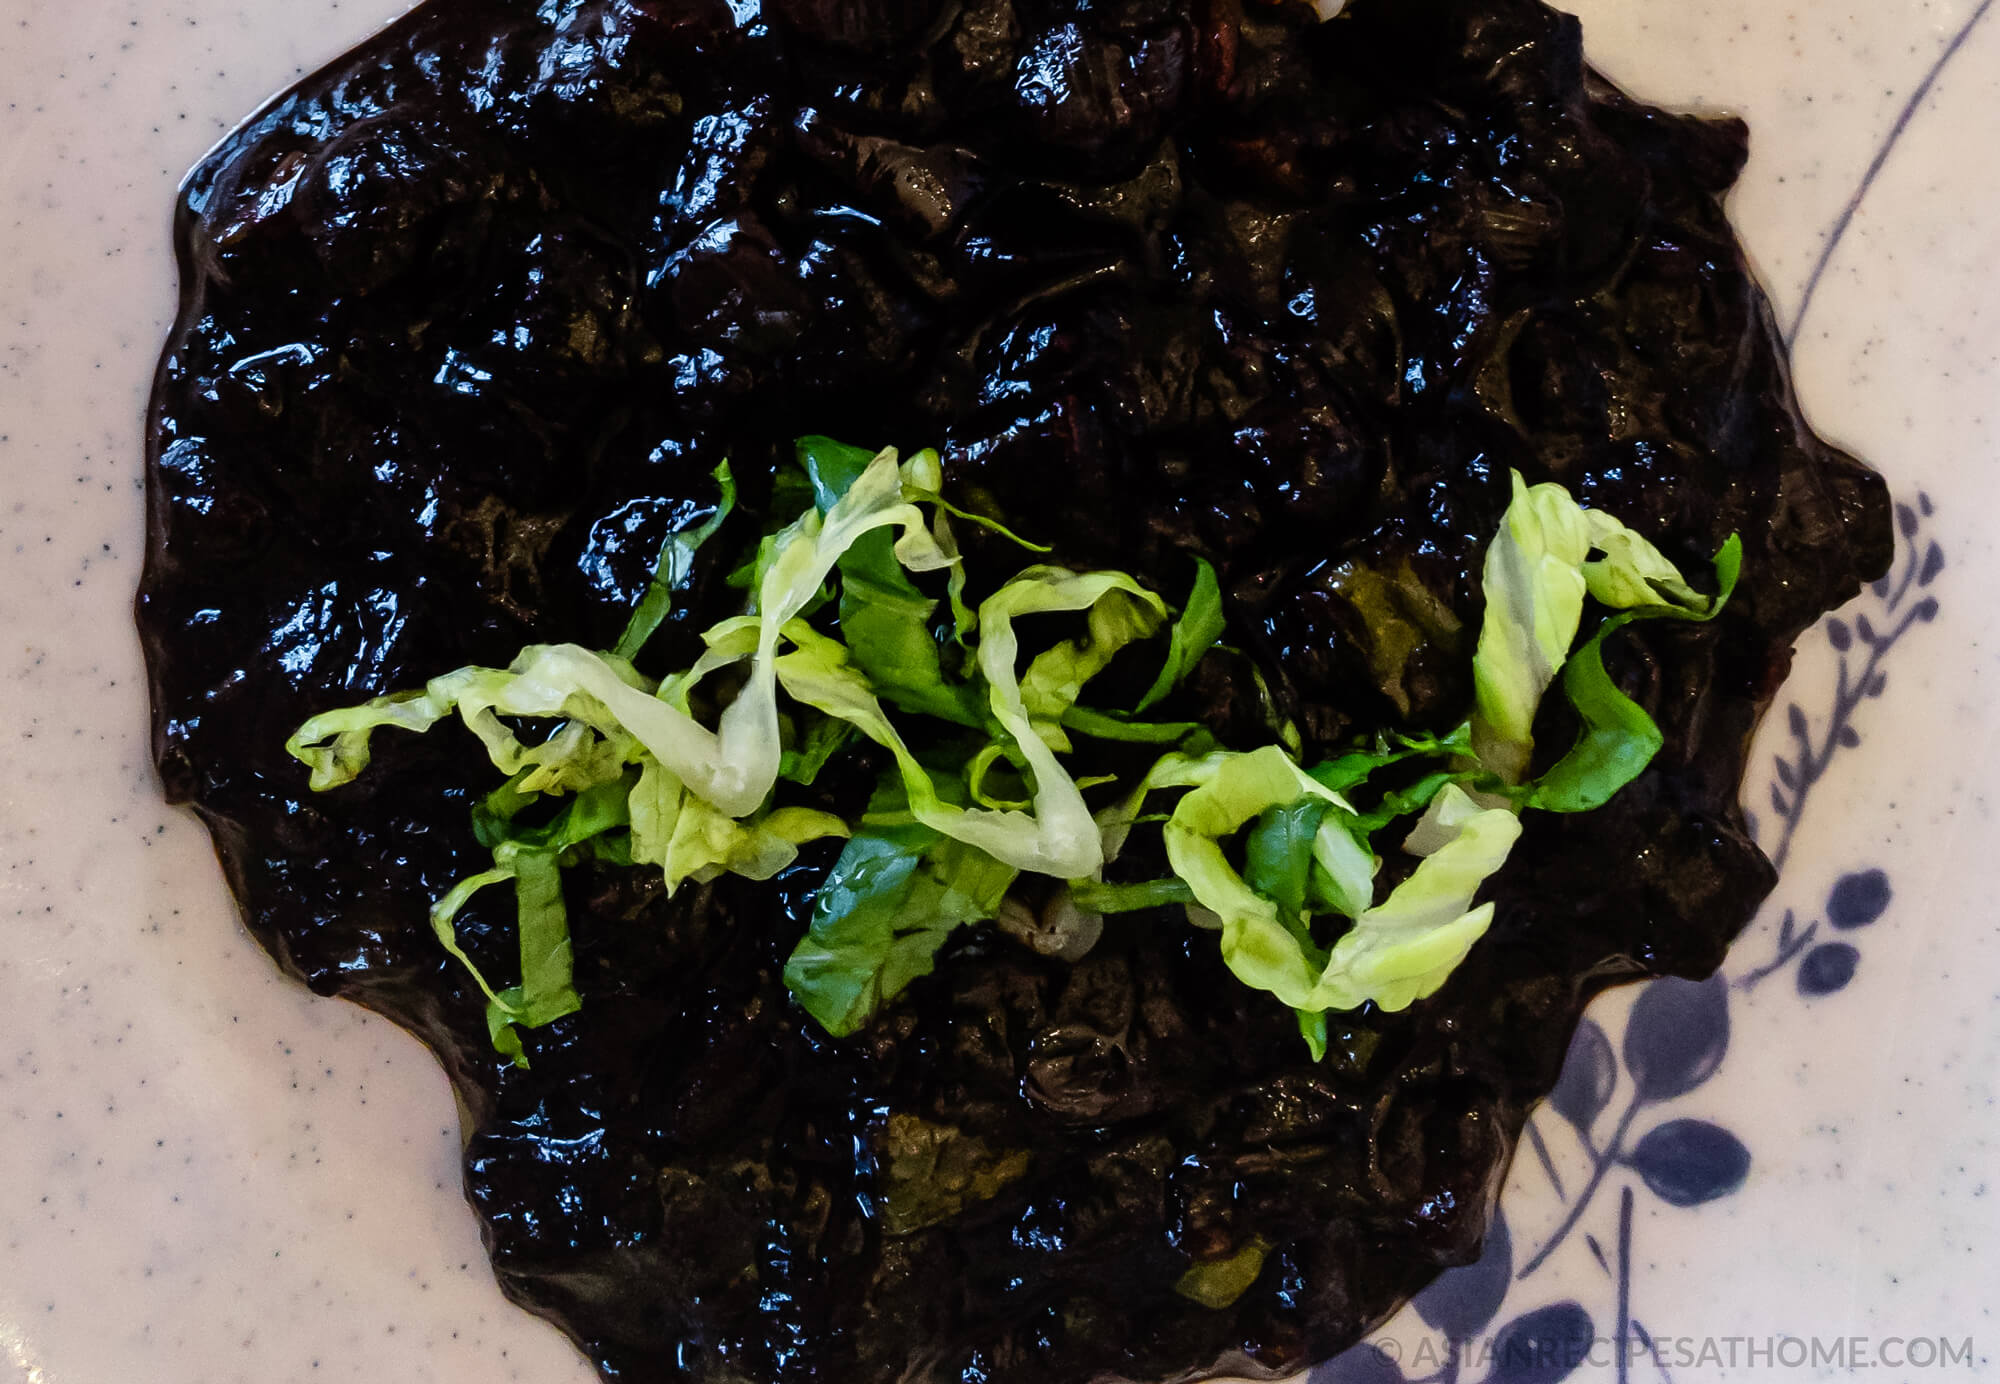 Our Korean-Chinese jjajang rice (jjajangbap 짜장밥) recipe consists of a delicious black bean sauce poured on top of a bed of rice.